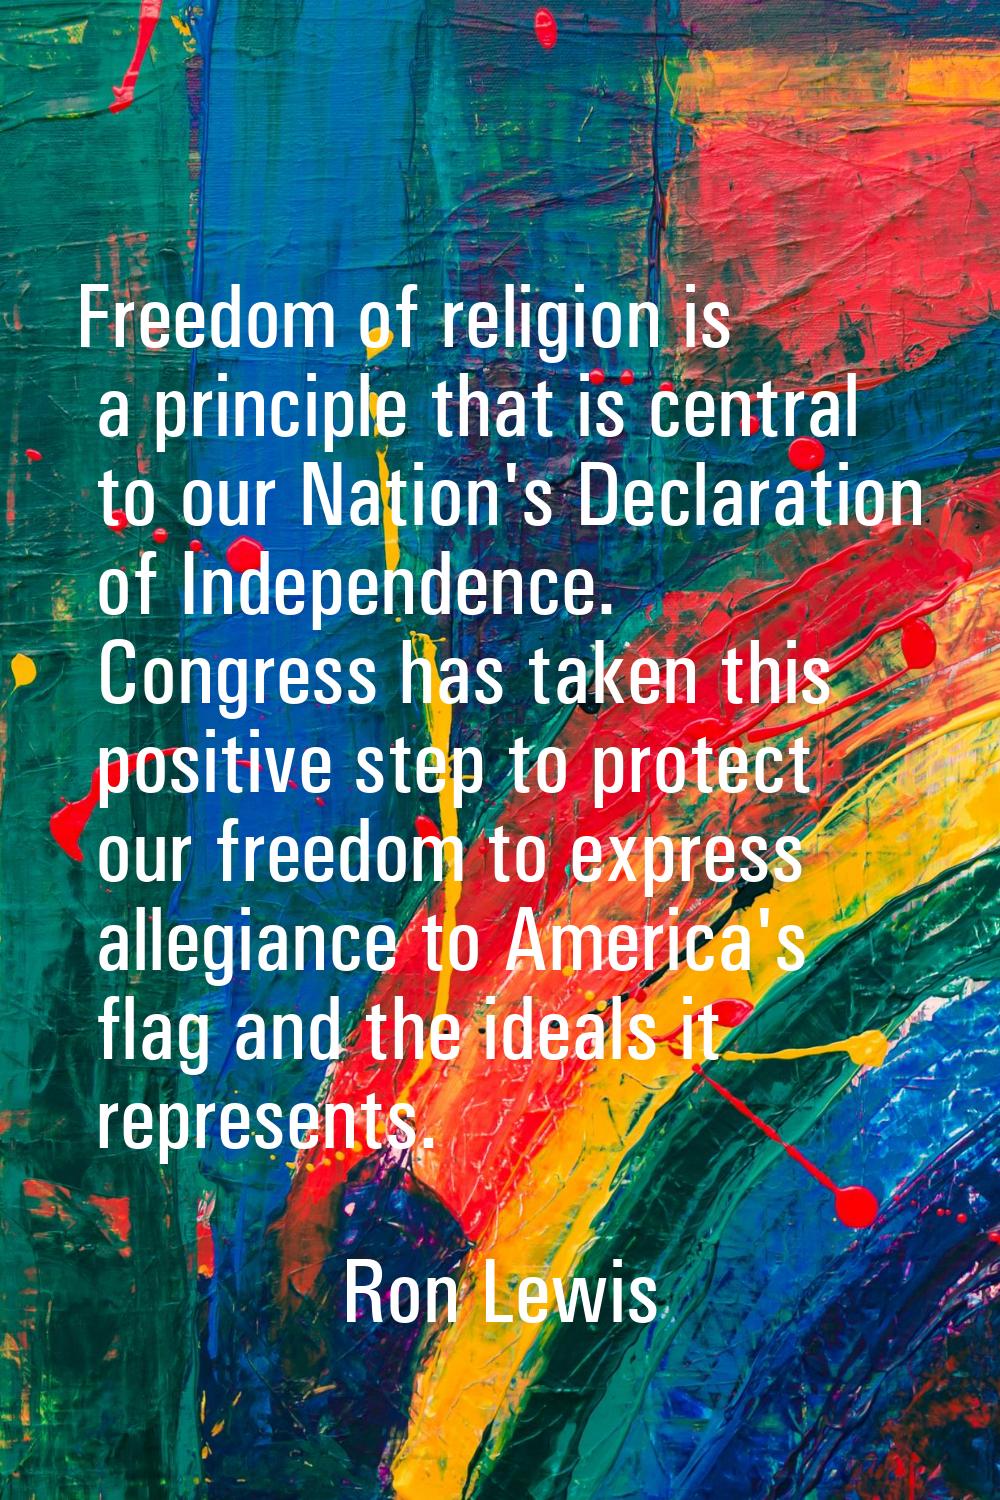 Freedom of religion is a principle that is central to our Nation's Declaration of Independence. Con